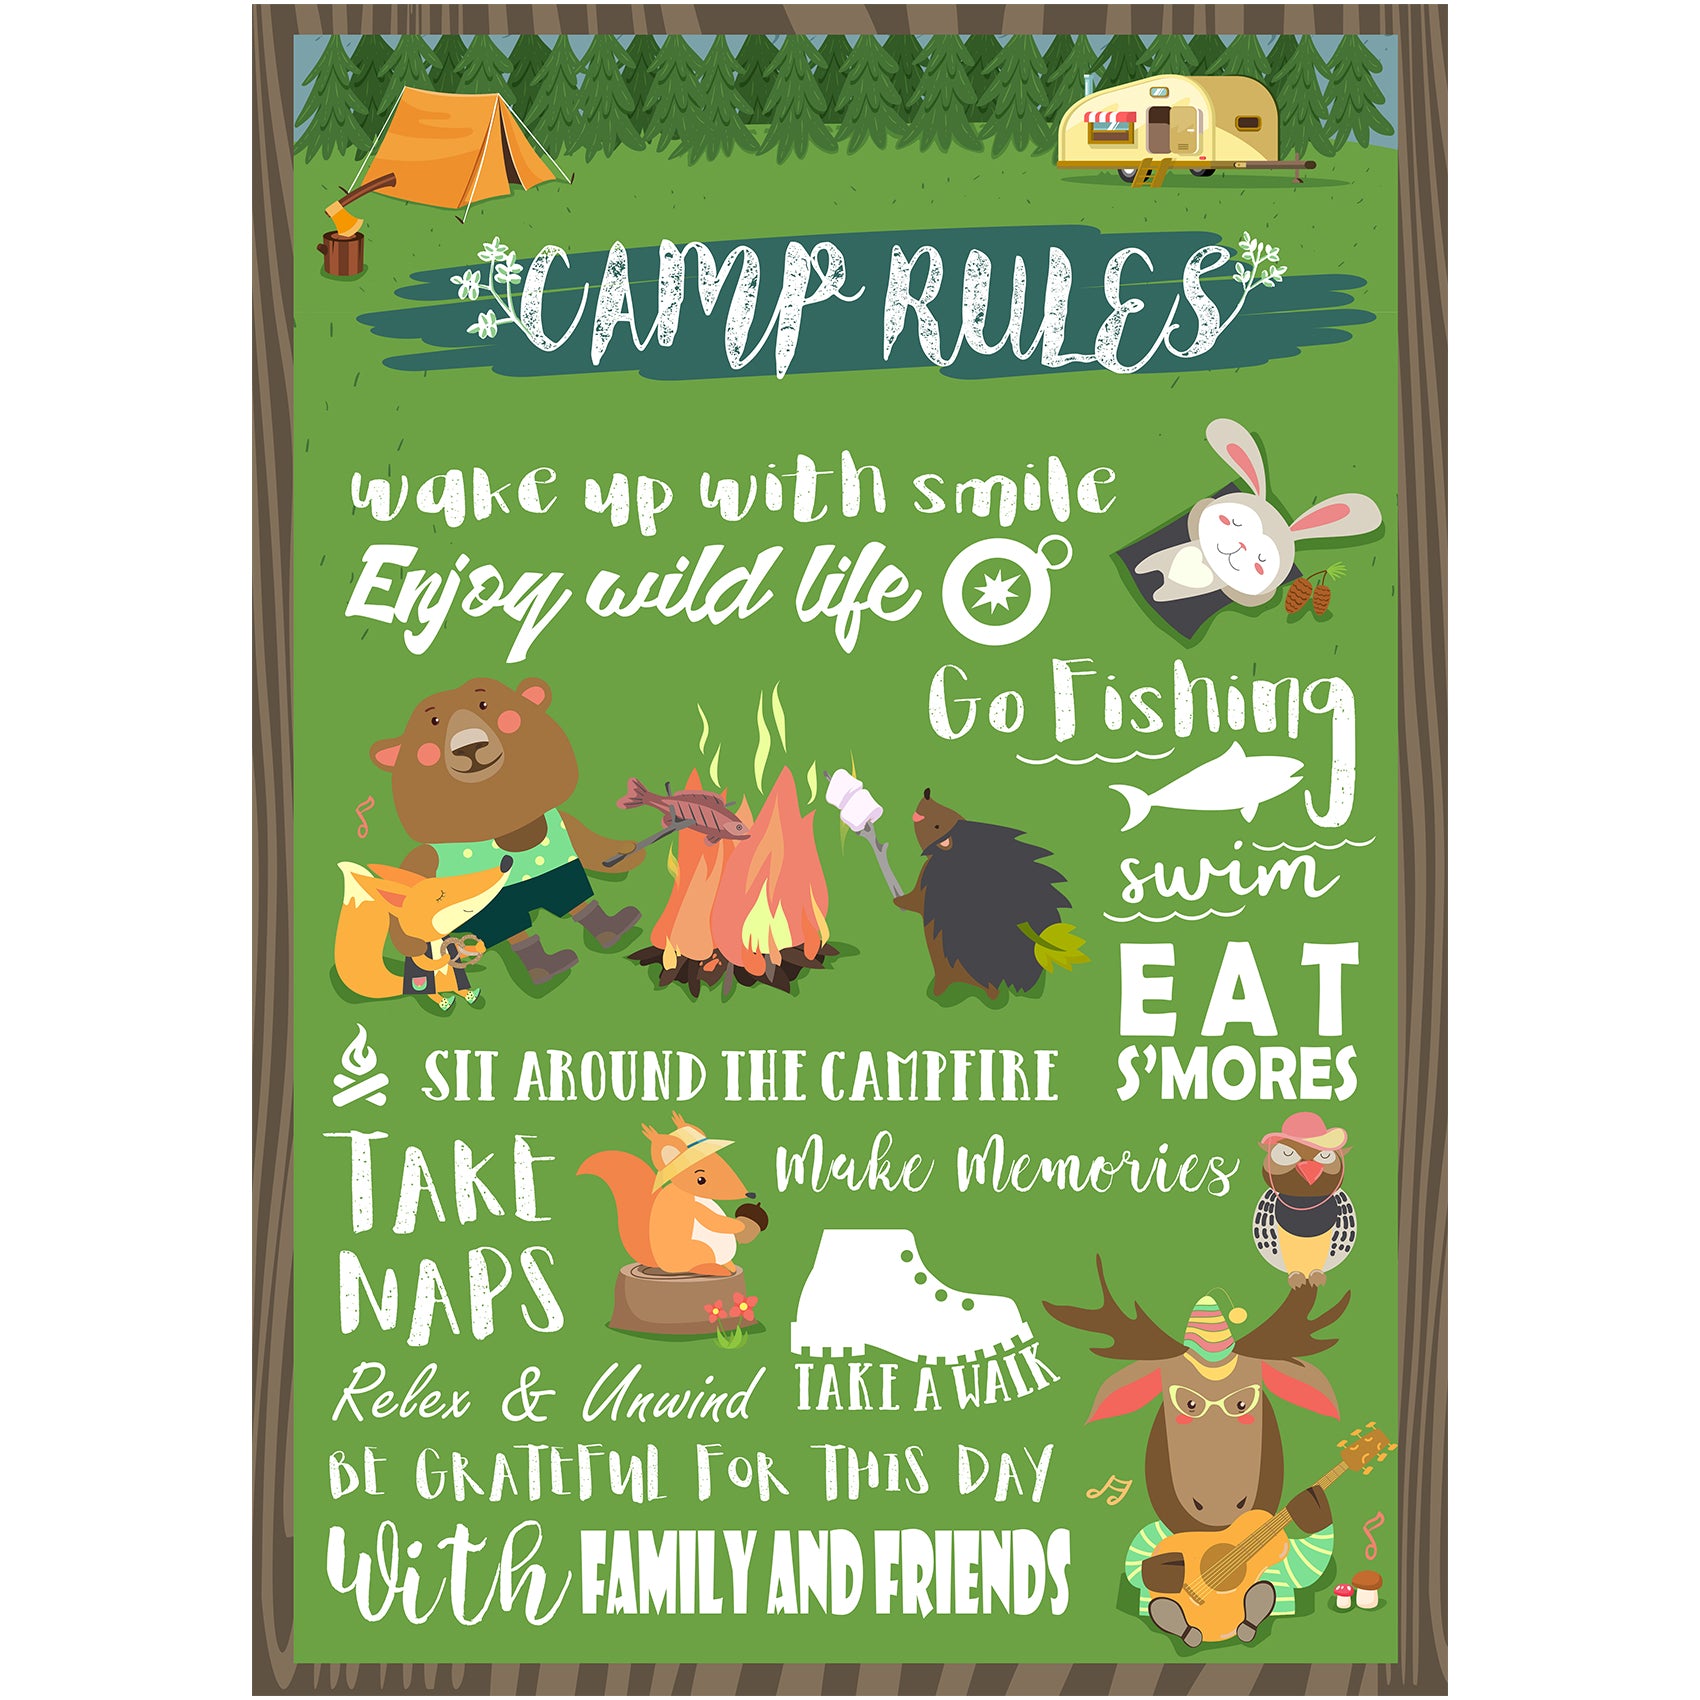 Woodland Camping Rules Sign Poster Photo Booth Props A3 16.5x11.8inch